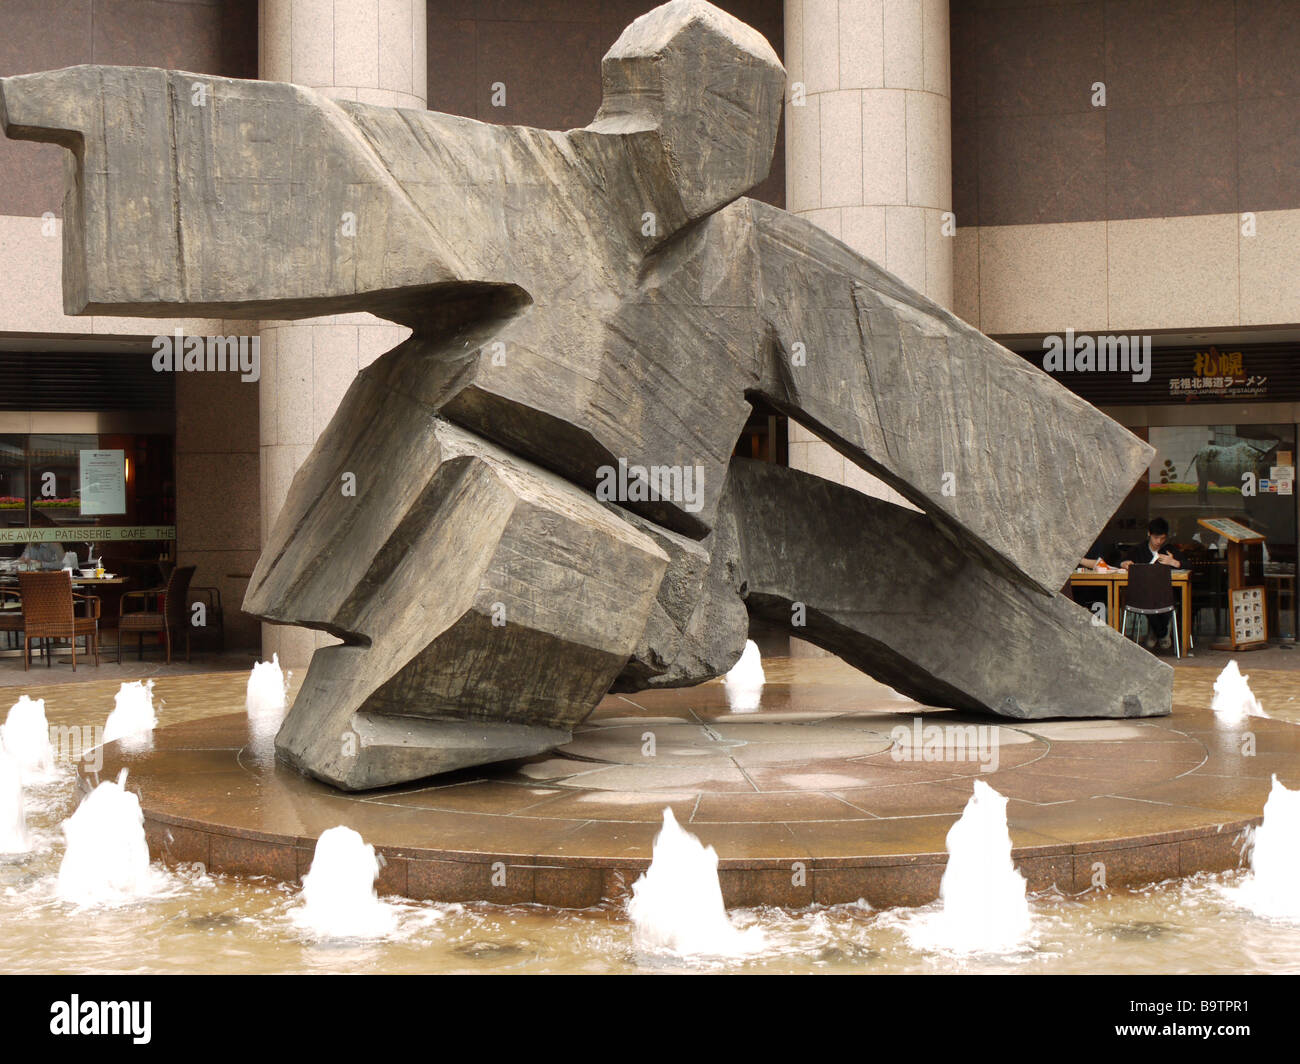 Tai Chi statue by Taiwanese sculptor Ju Ming in Exchange Square, Hong Kong  Stock Photo - Alamy